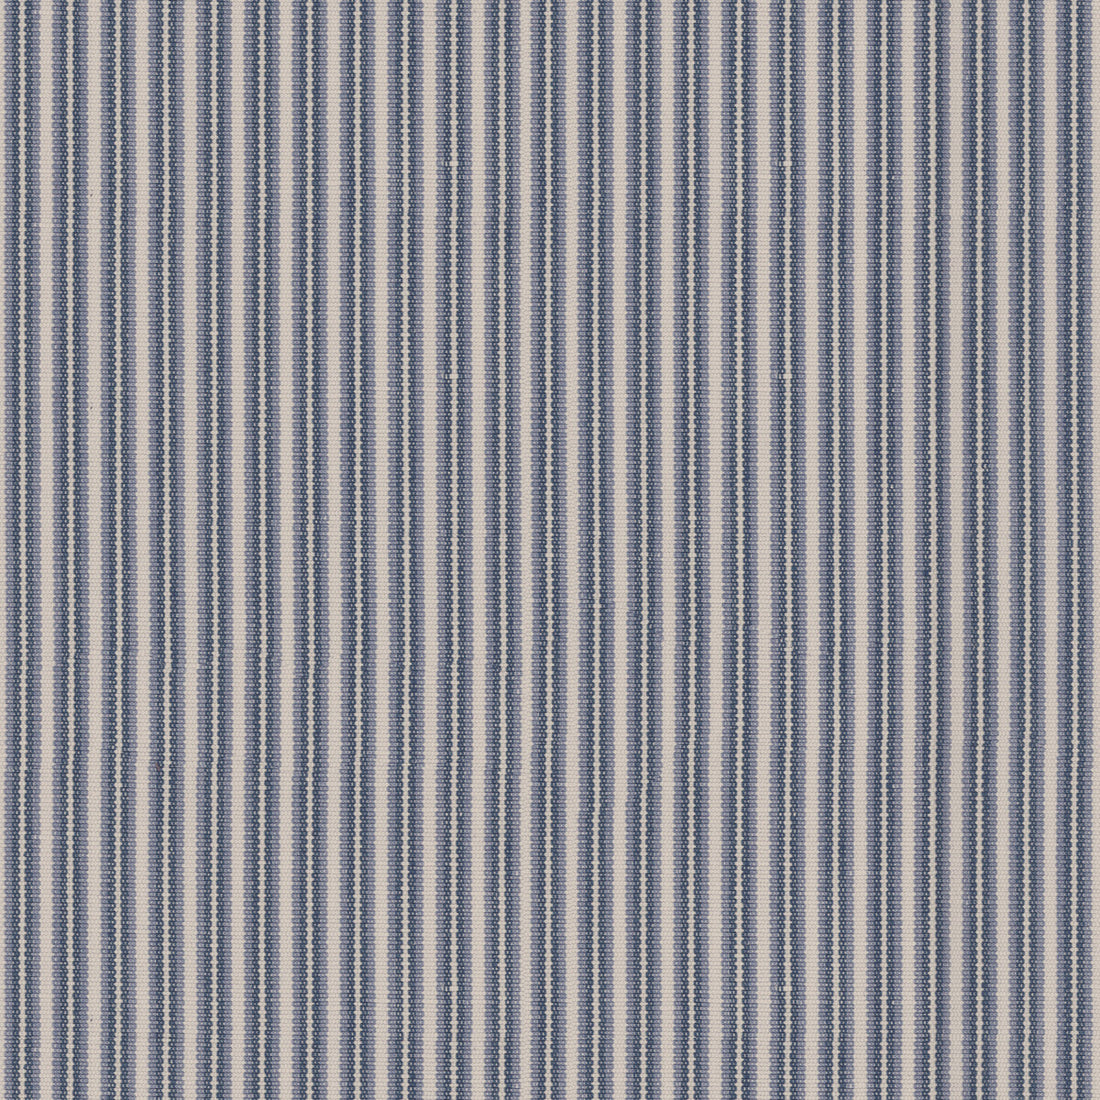 Chamas Stripe fabric in indigo color - pattern 8017103.50.0 - by Brunschwig &amp; Fils in the Durance collection